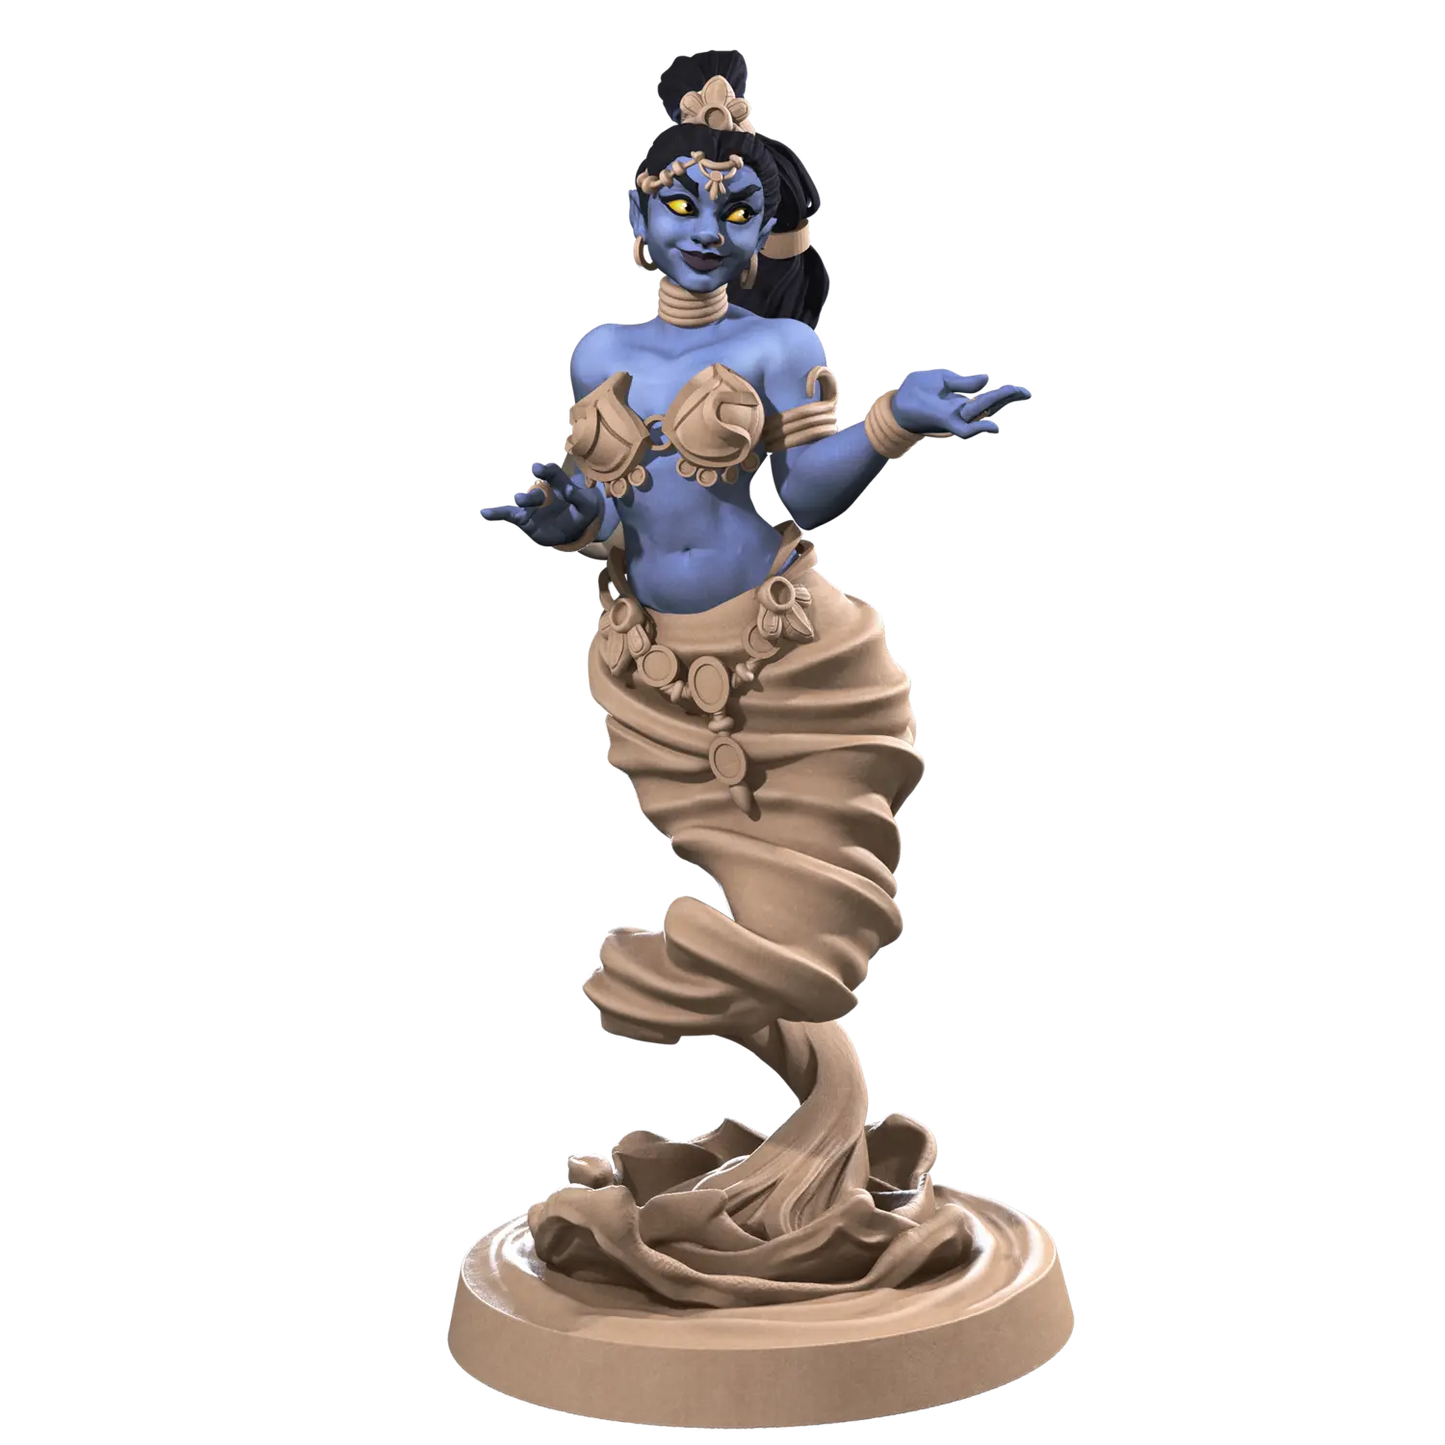 DnD Elementals - Miniature - Monsters - nsfw Jasmine, Air Djinn 01 Classic Elementals - Miniature - Monsters - nsfw sold by DoubleHitShop